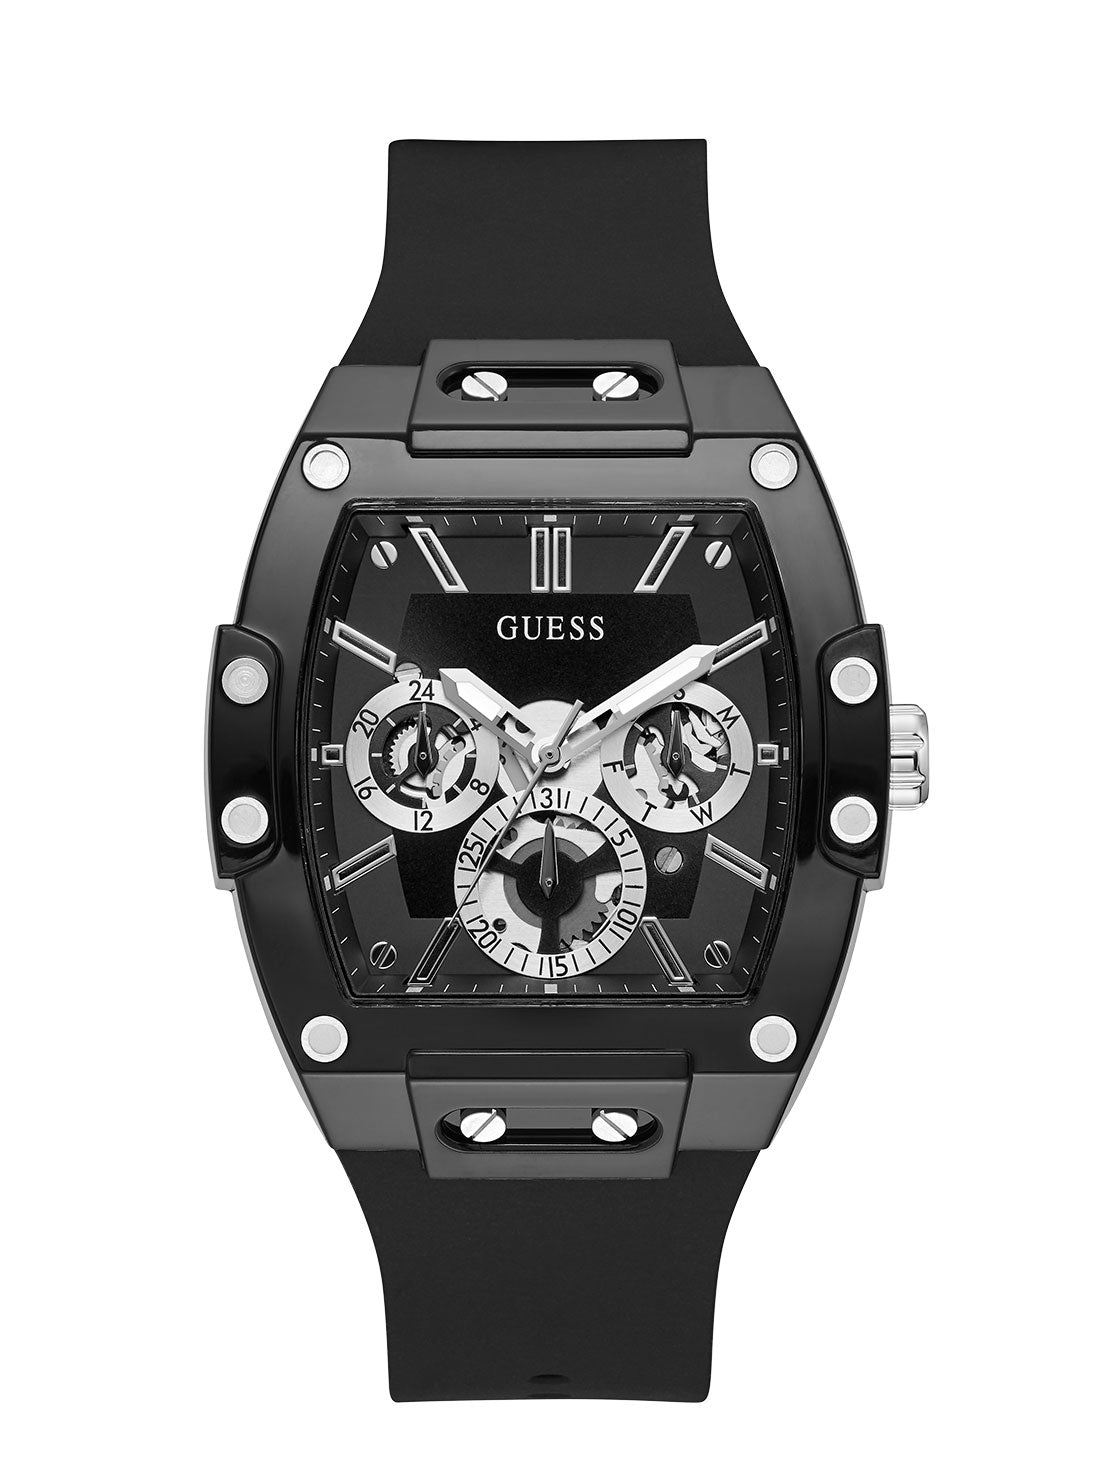 GUESS Mens Black Phoenix Silicone Watch GW0203G3 Front View